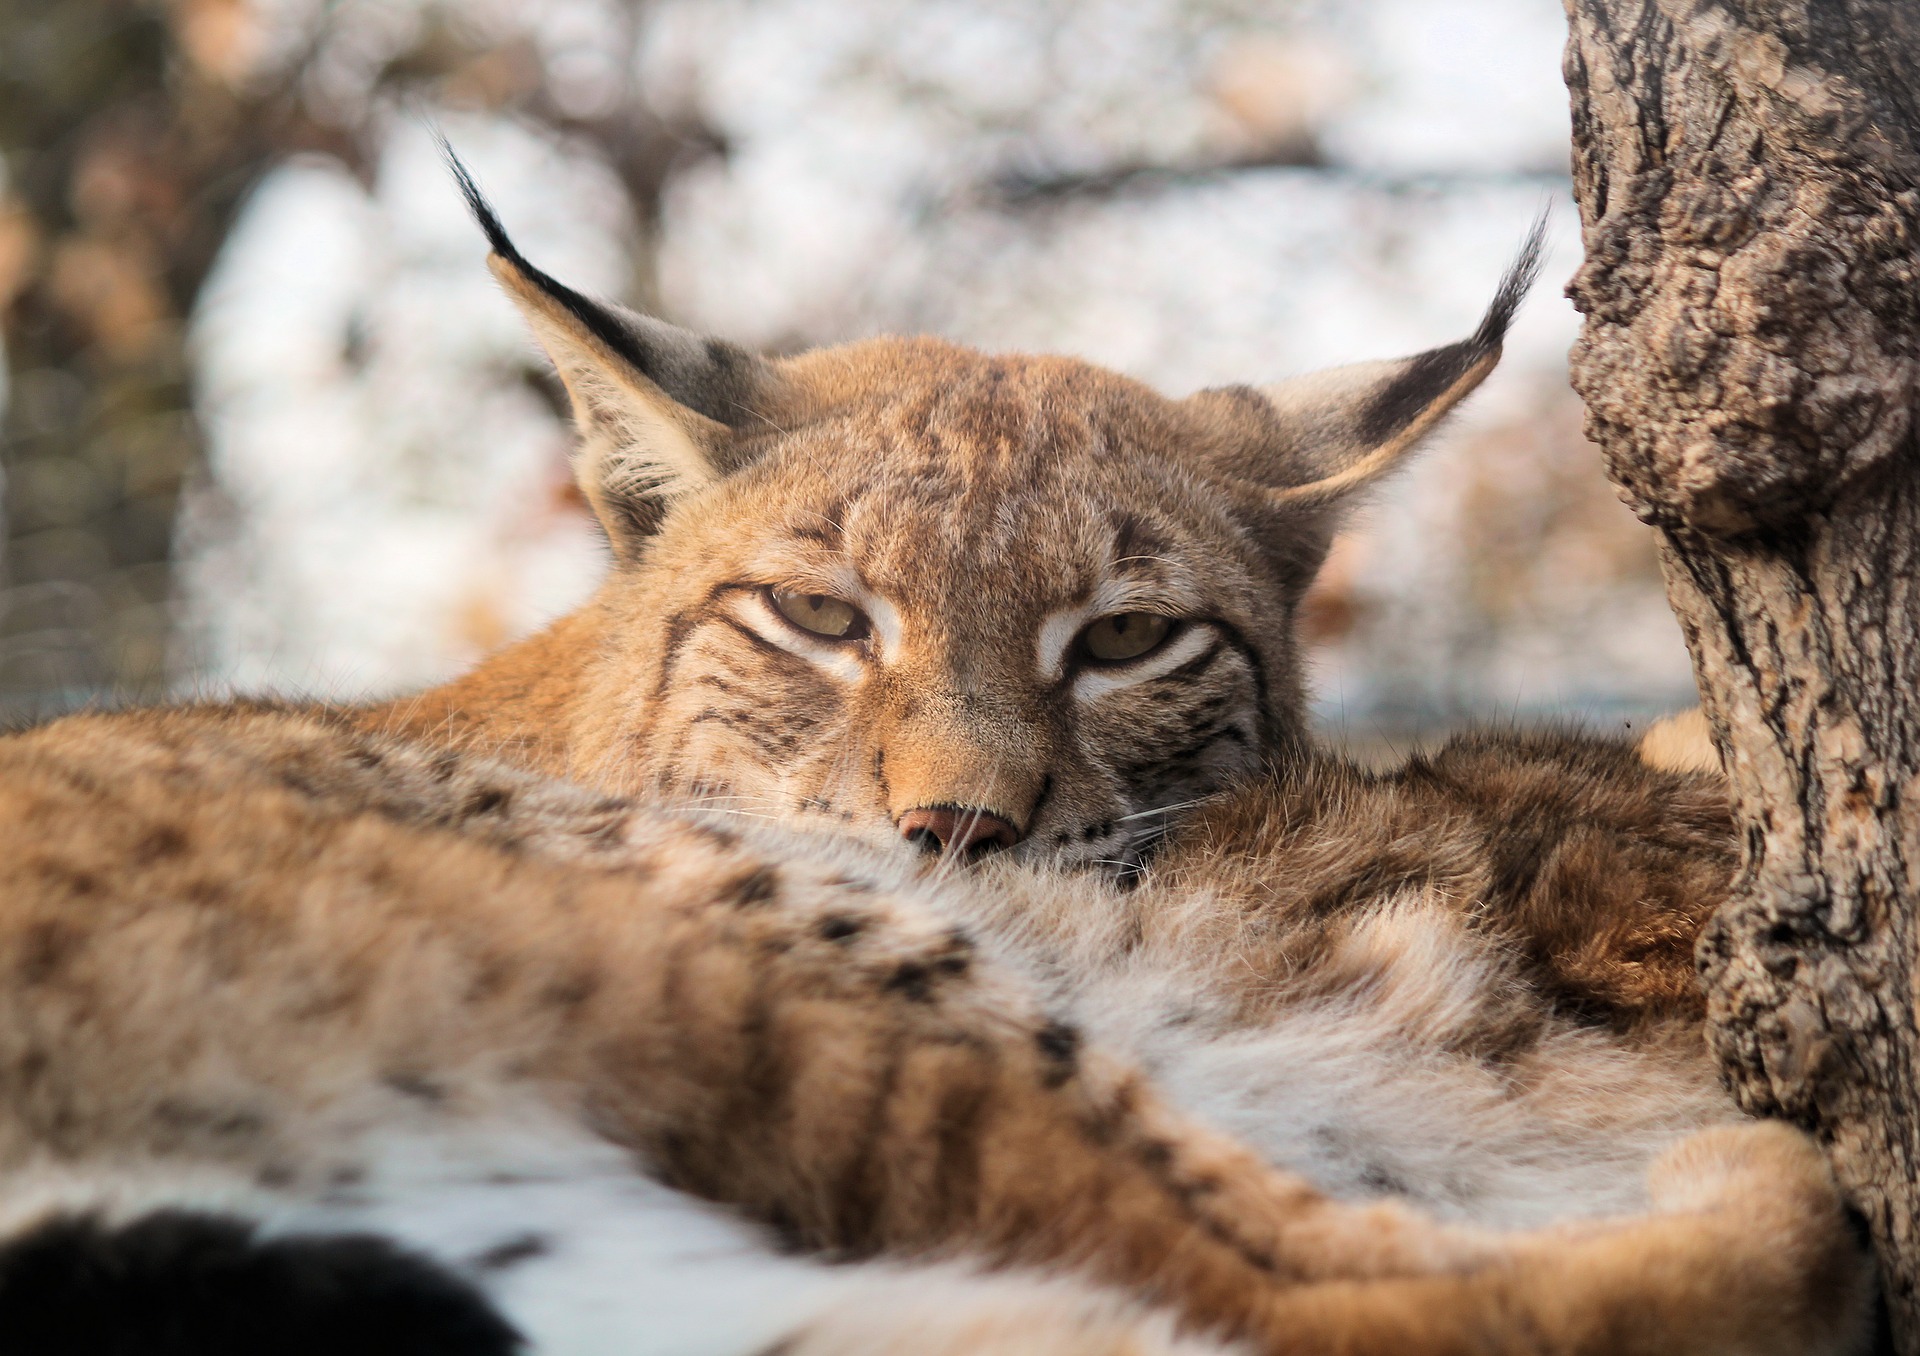 Lynx a missing species - facts and information | Trees for Life